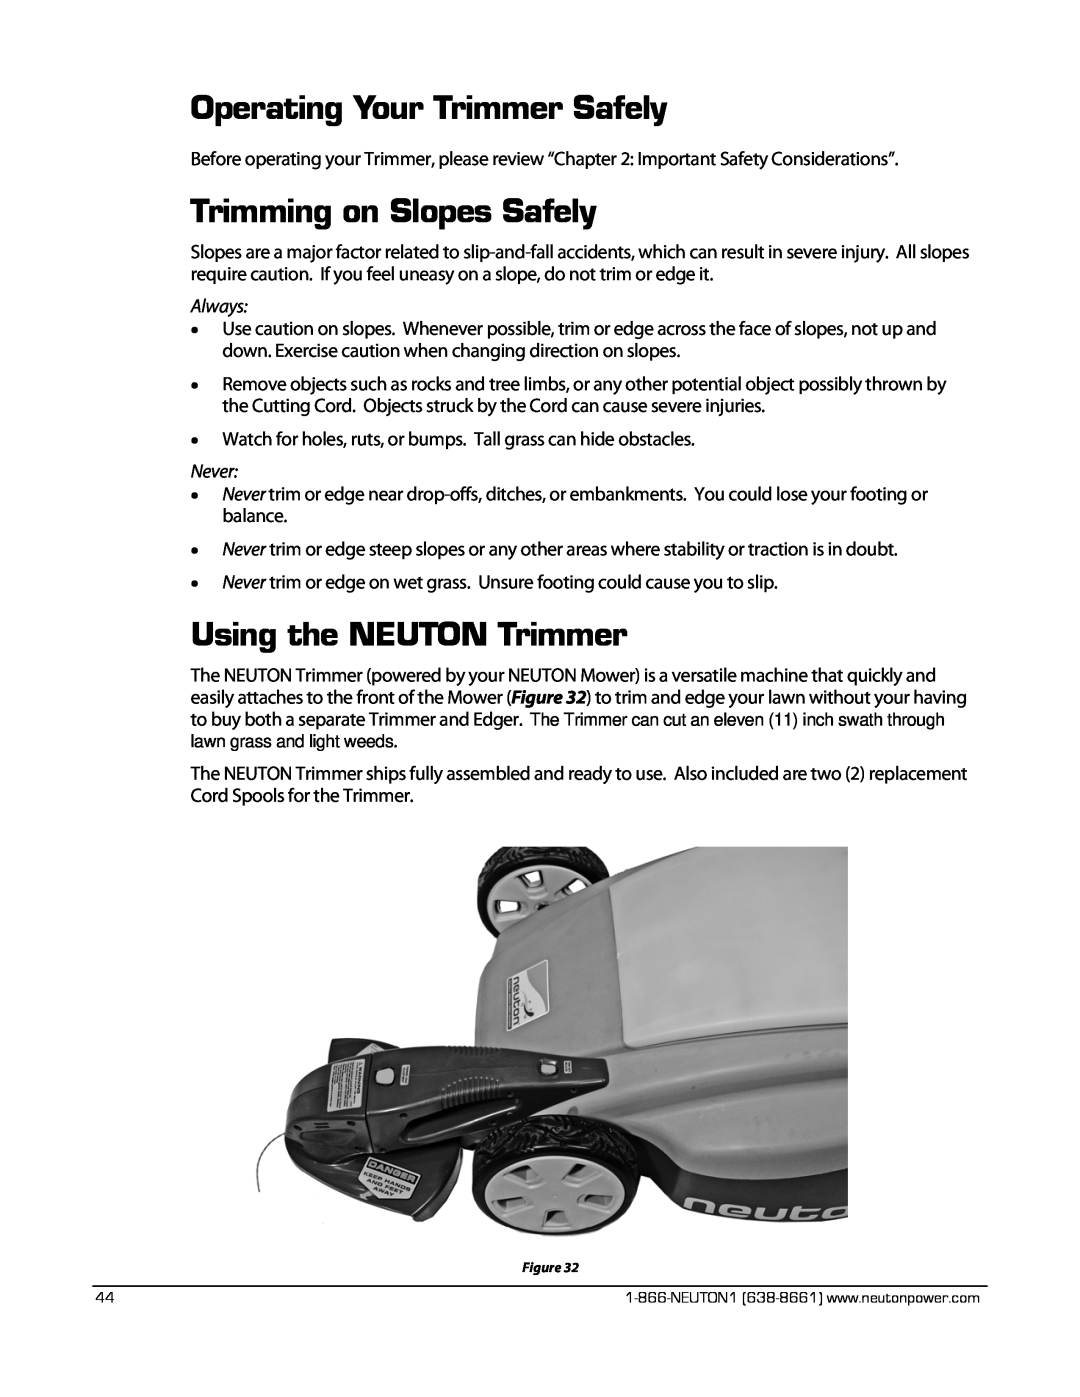 Neuton CE 6.2 manual Operating Your Trimmer Safely, Trimming on Slopes Safely, Using the NEUTON Trimmer, Always, Never 